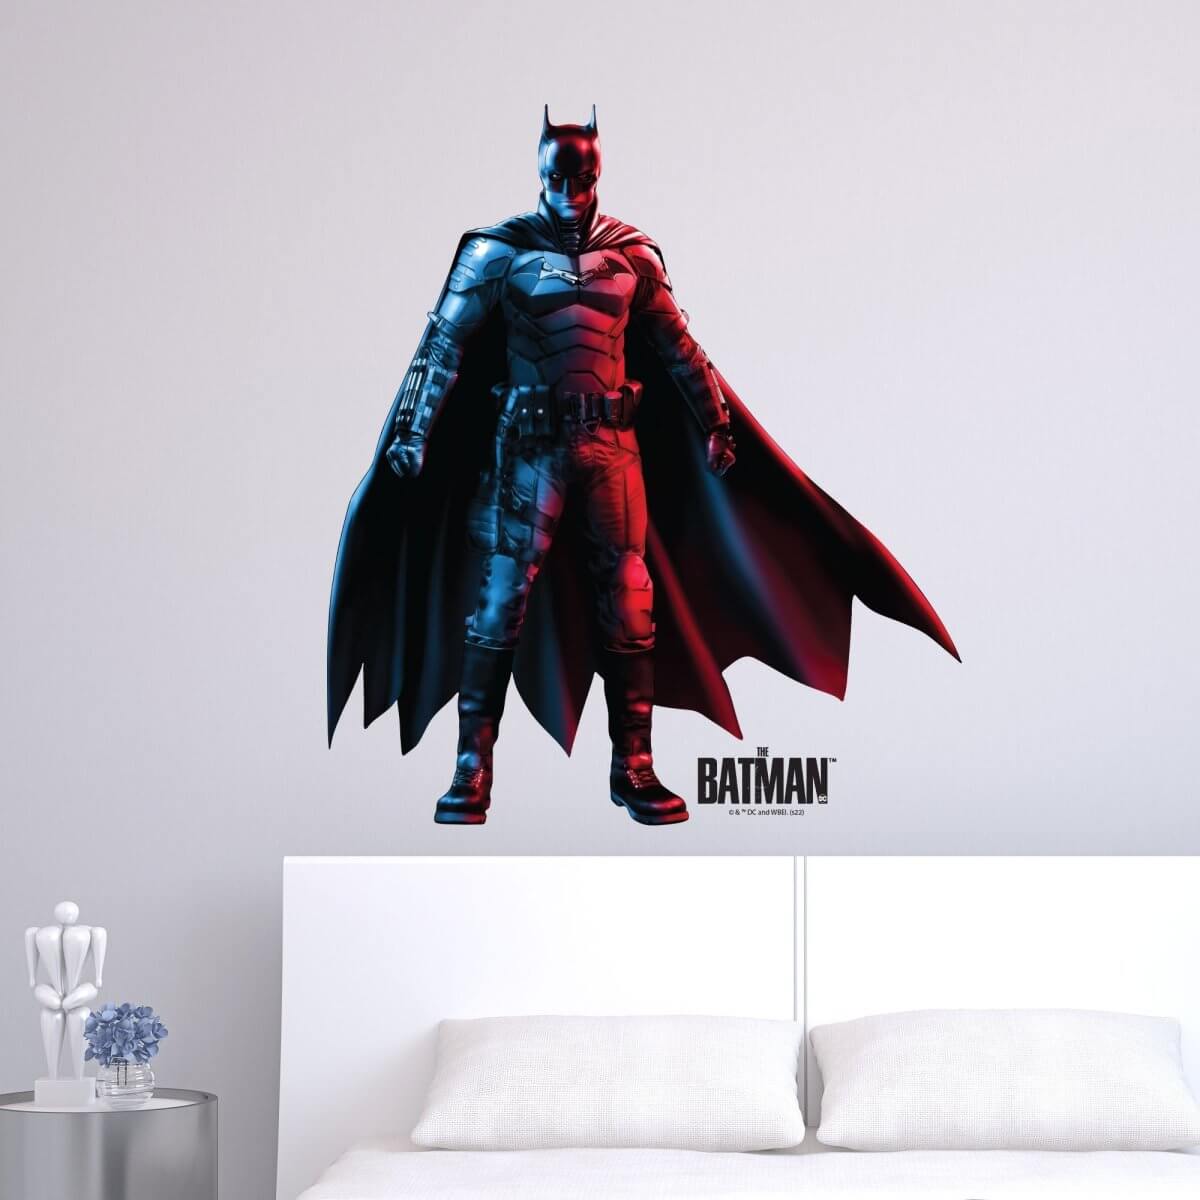 The Batman 2022 Combat Armor Neon Licensed Wall Decal